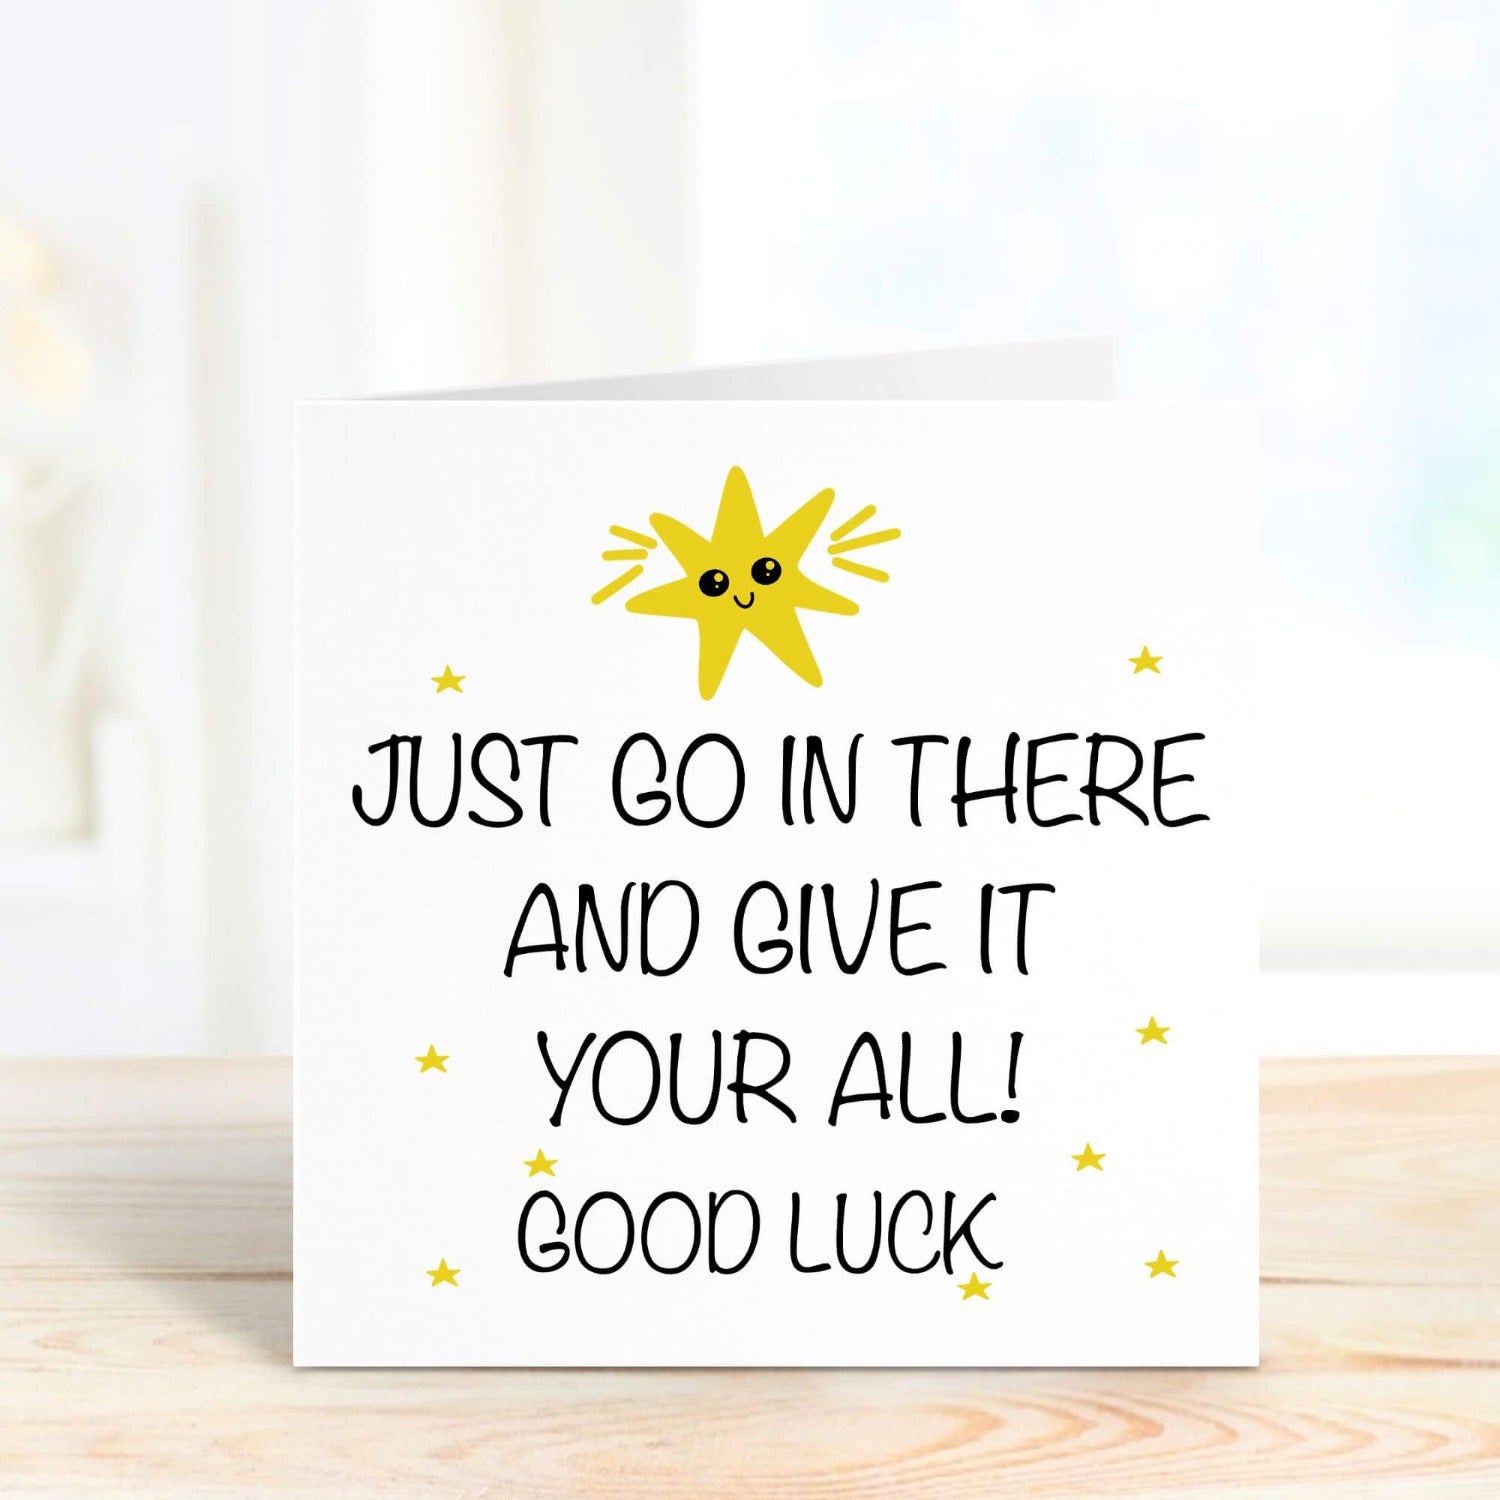 good luck personalised card with a star